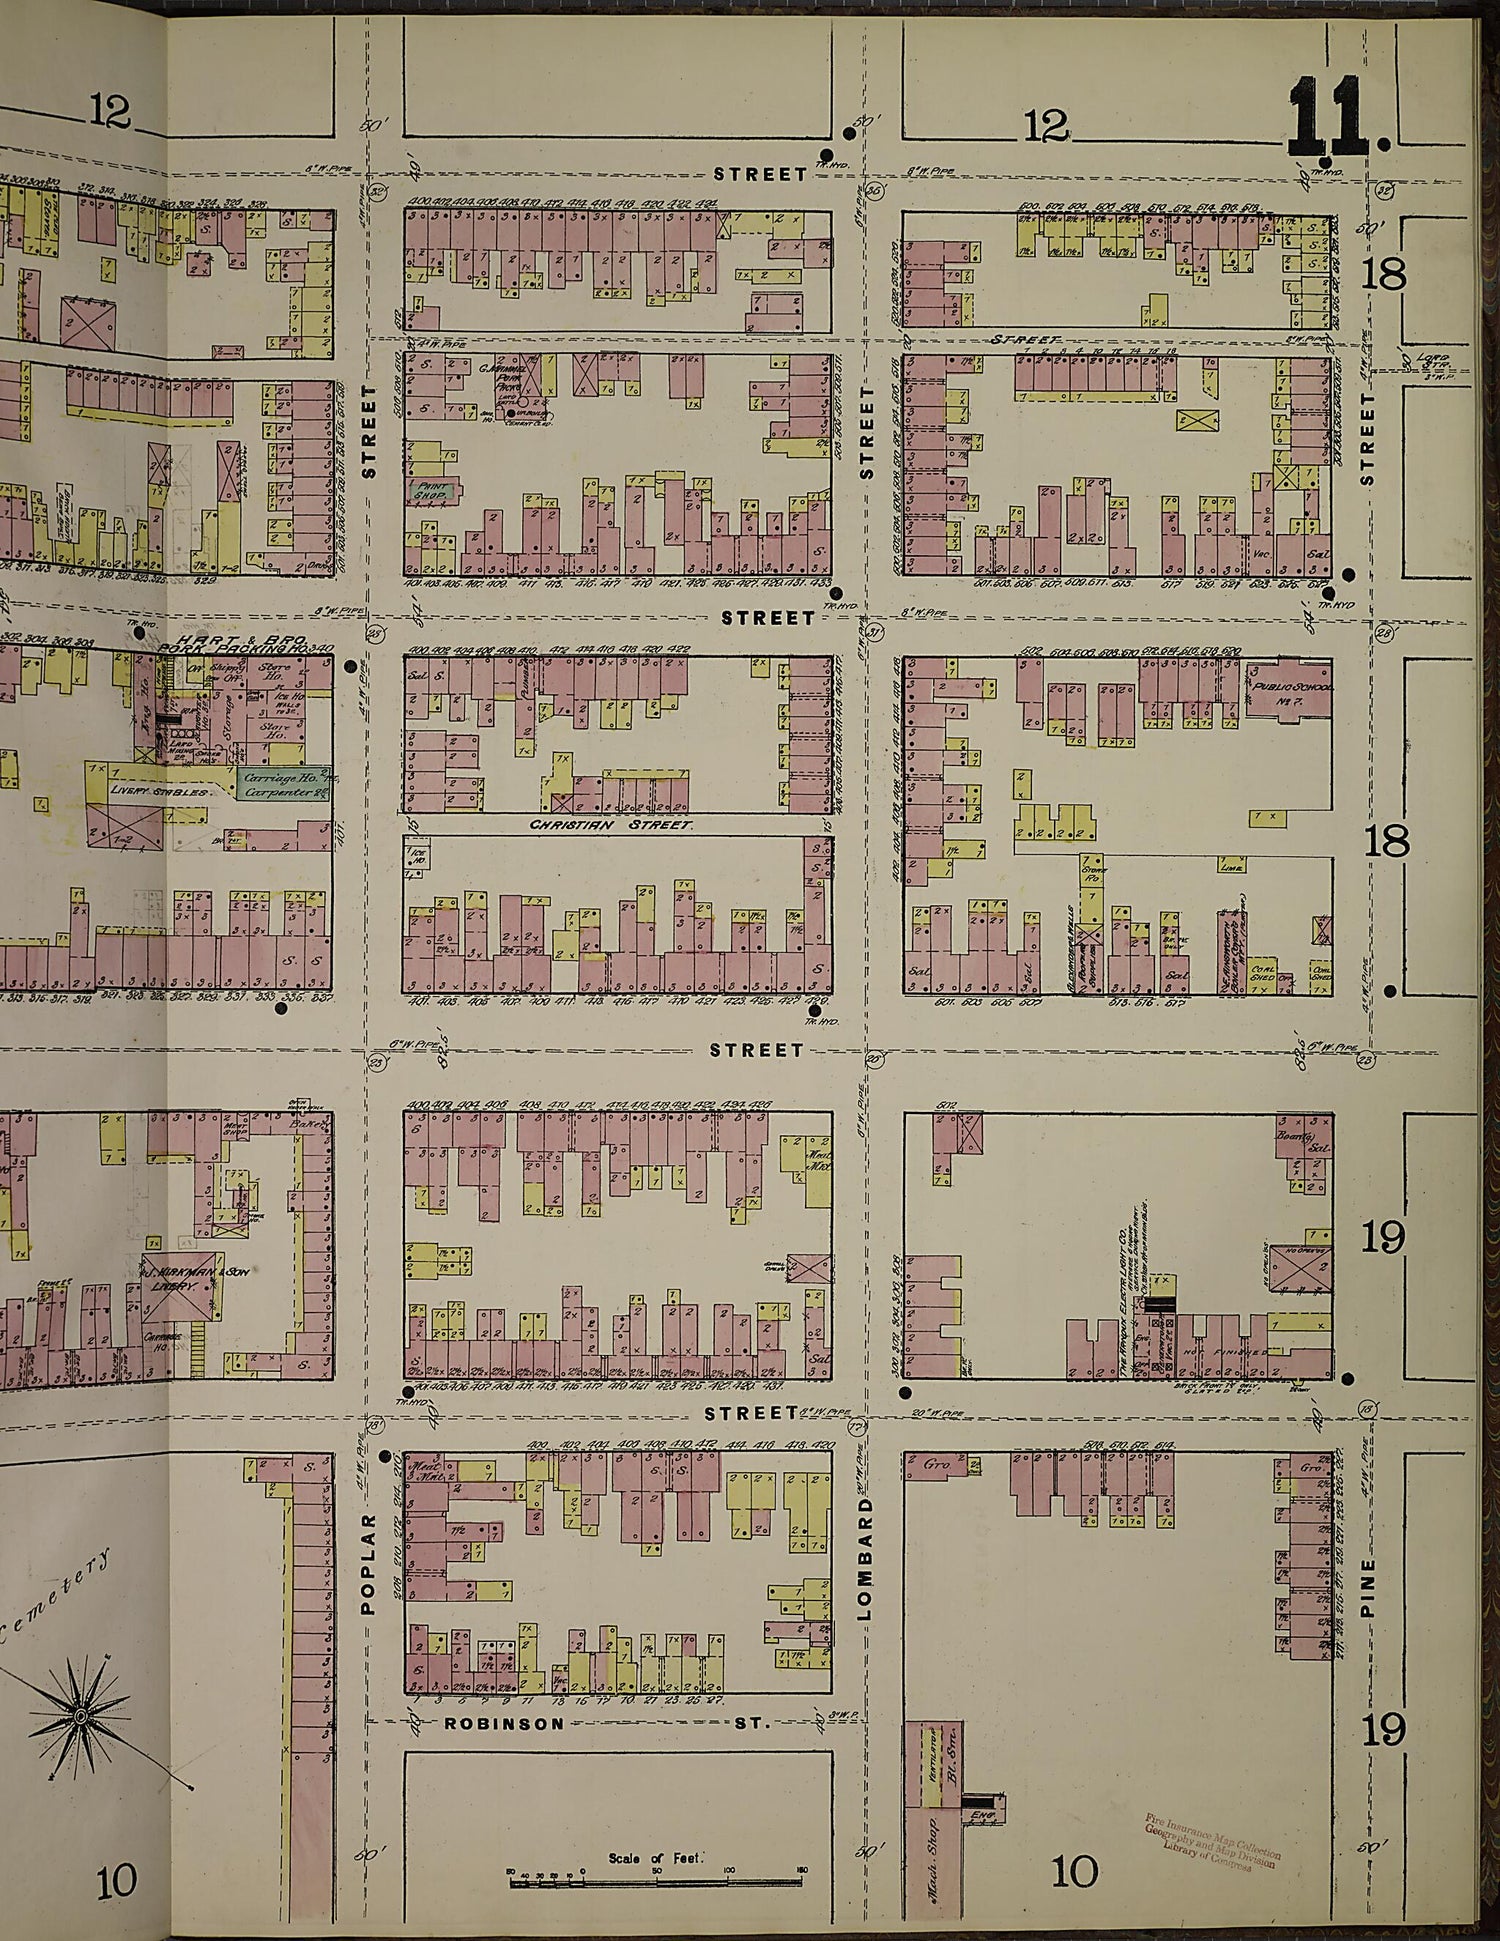 This old map of Wilmington, New Castle County, Delaware was created by Sanborn Map Company in 1884